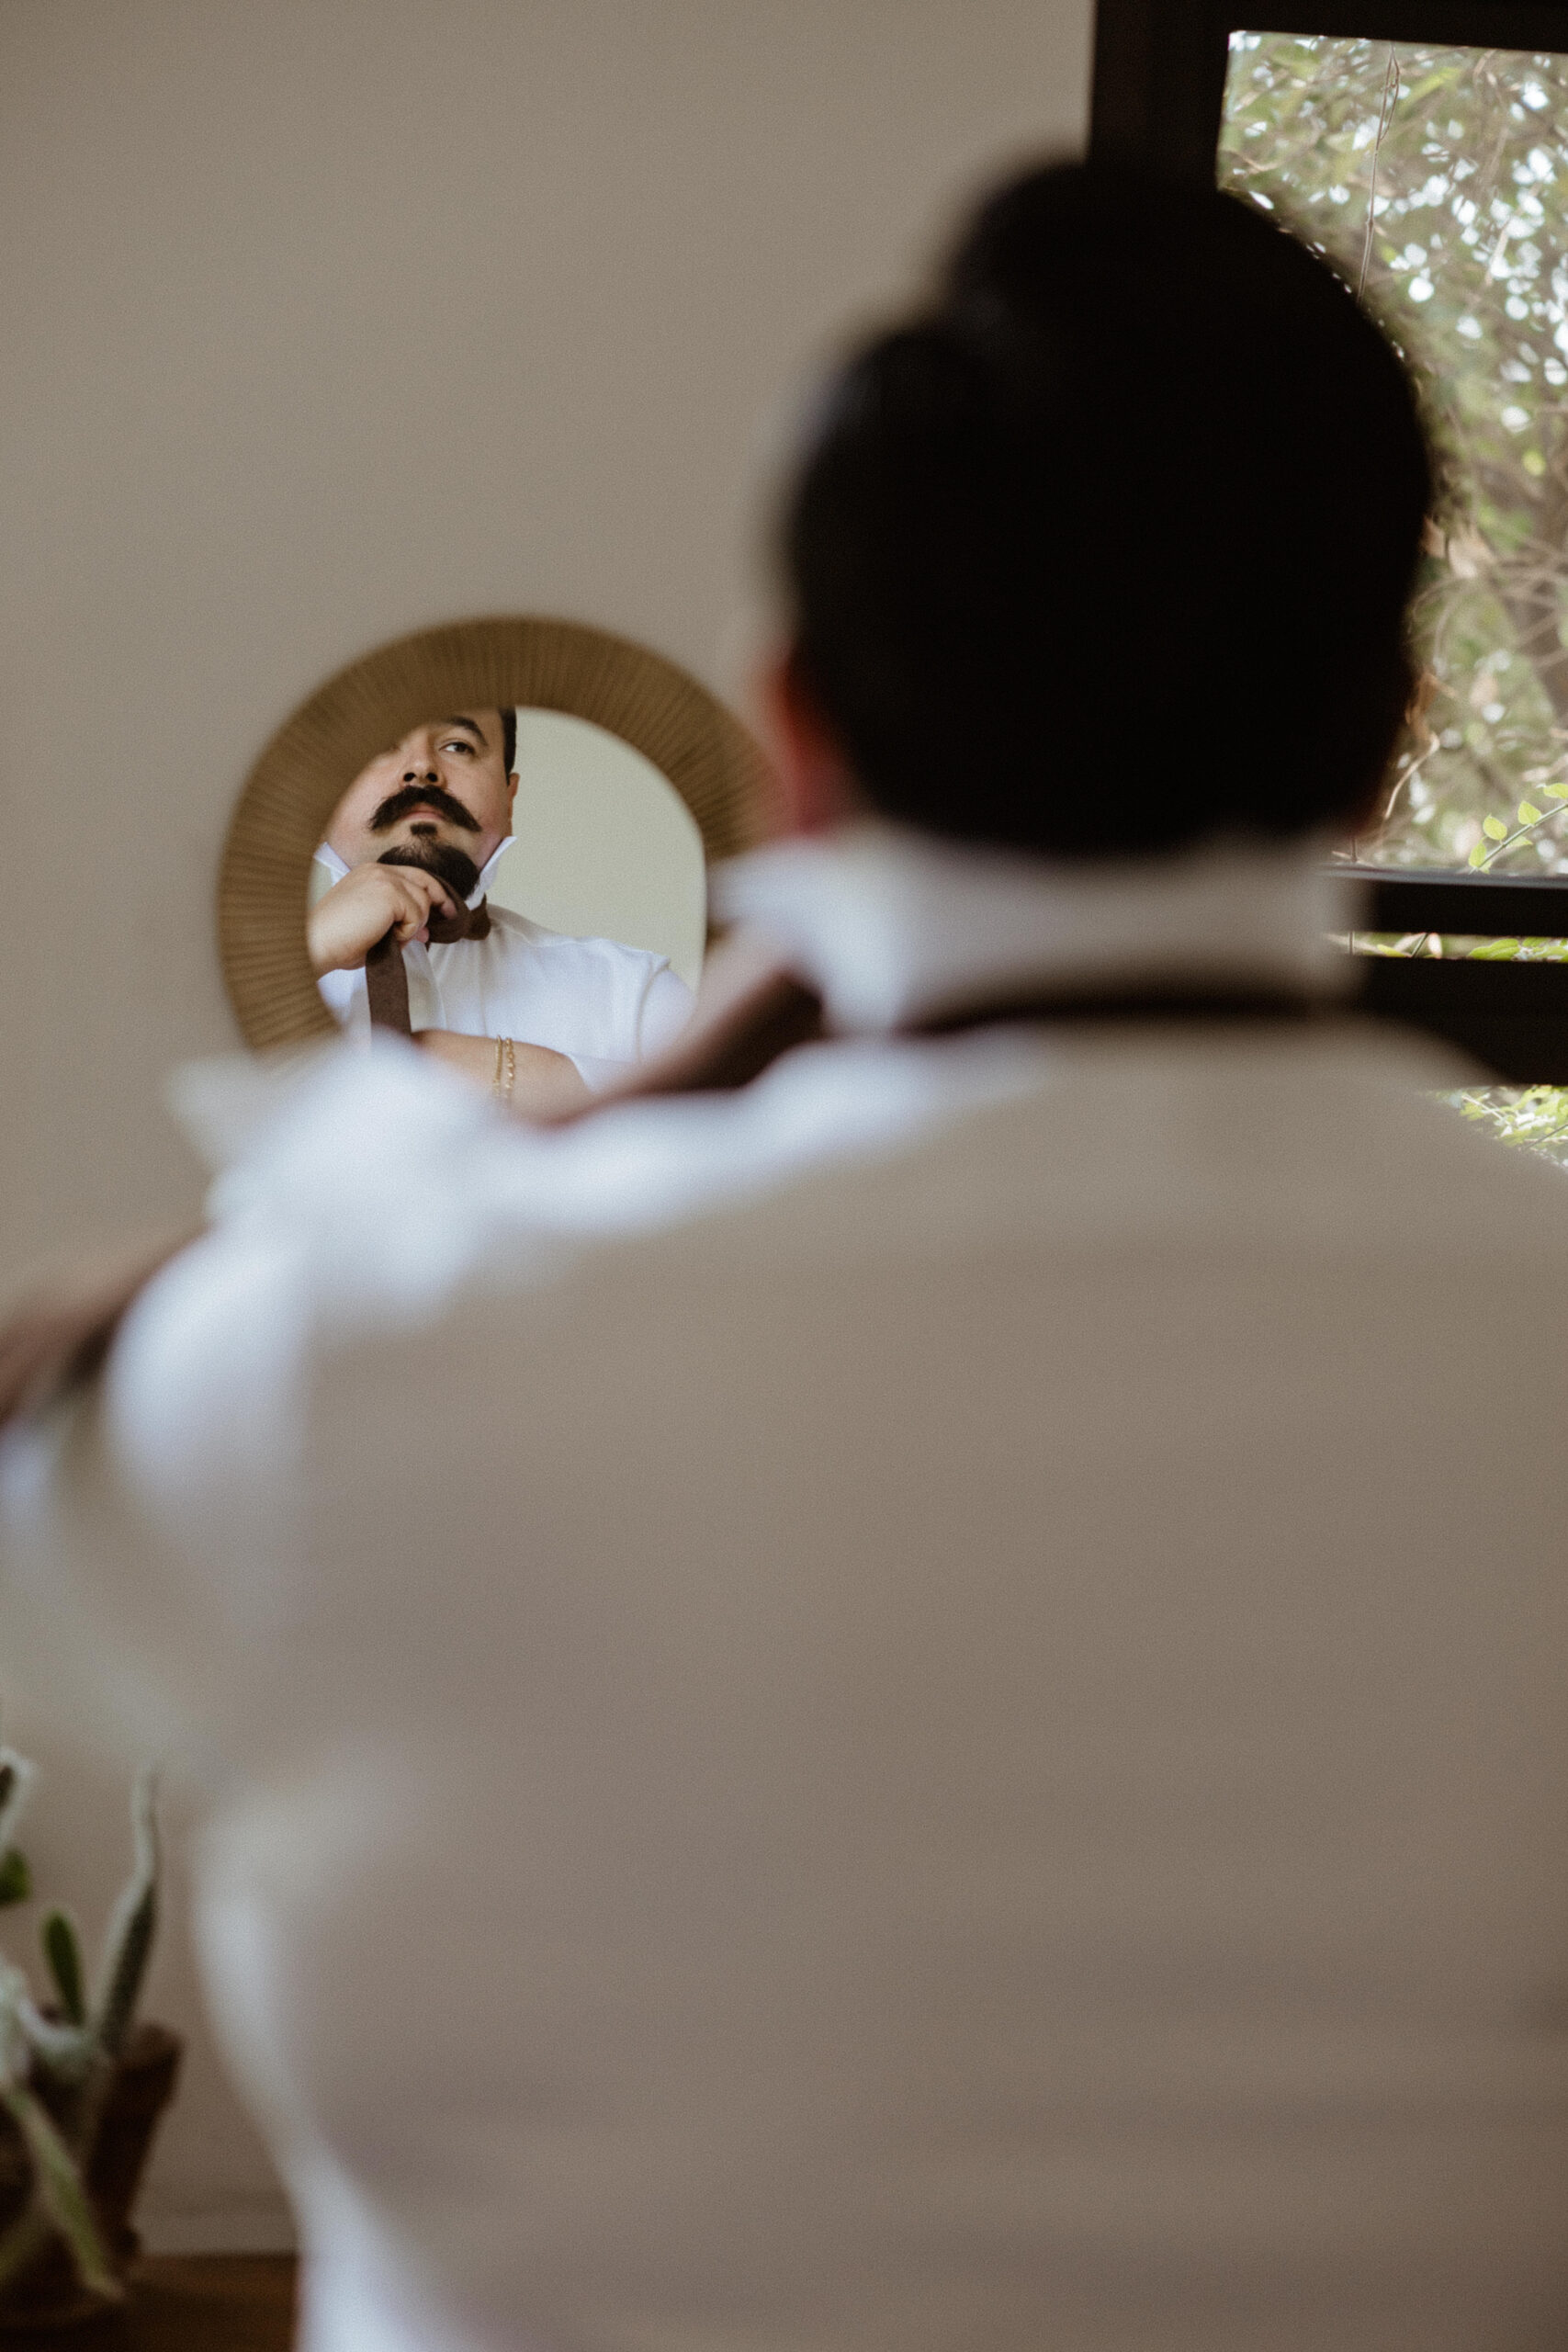 The handsome groom adds the final touches as he preps for his wedding day